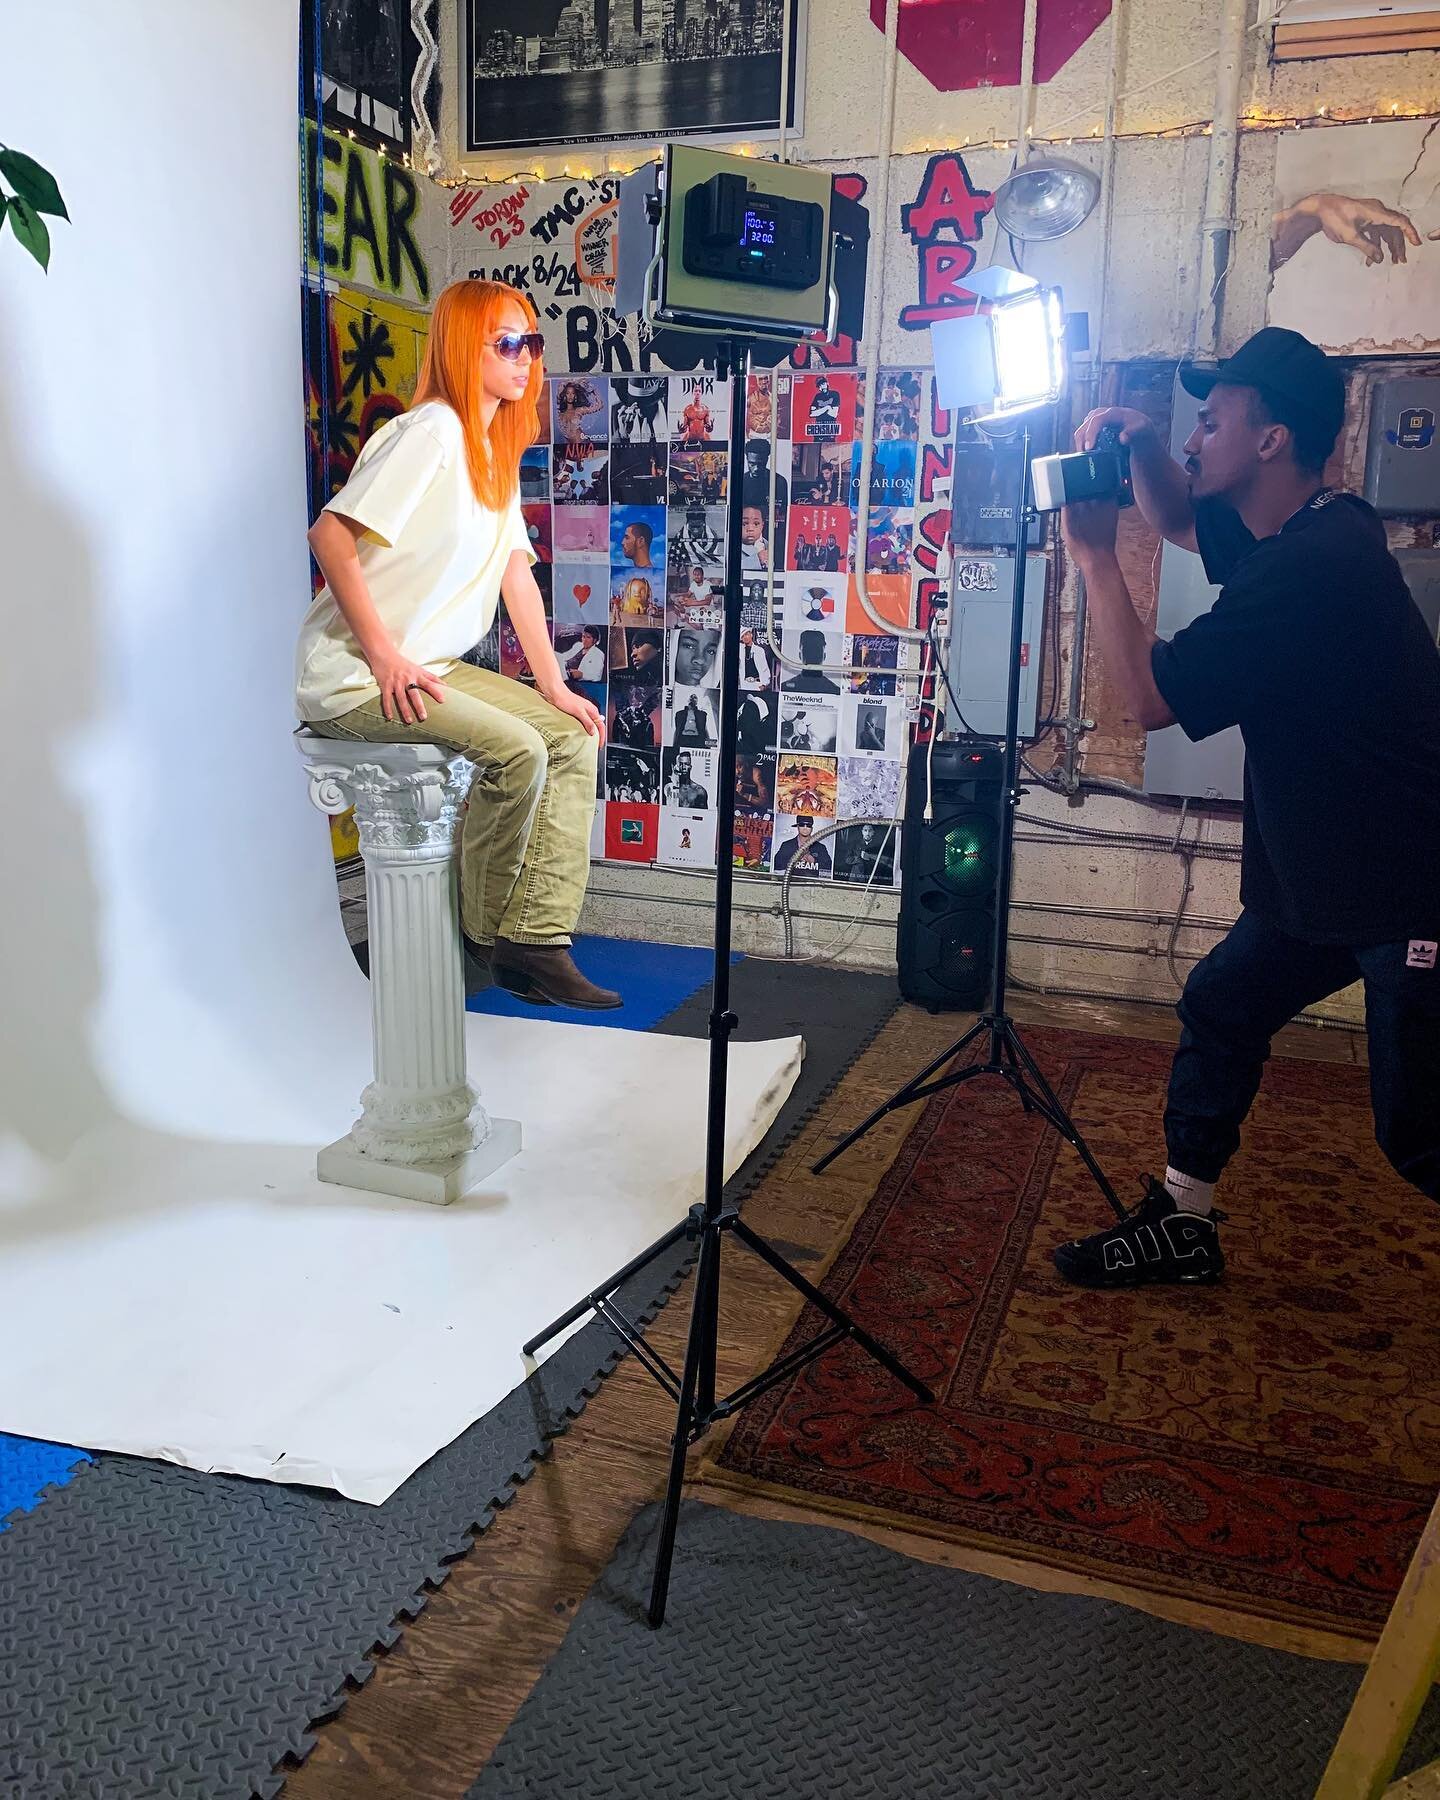 Behind the scenes of @youfoundforest photo shoot w/ @richieg1rl swipe left to see end results. Book your next shoot  @zinclubhouse ☯️ #photoshoot #yffproductions #youfoundforest #zinclubhouse #zin #richiegirl #behindthescenes #unplugworld